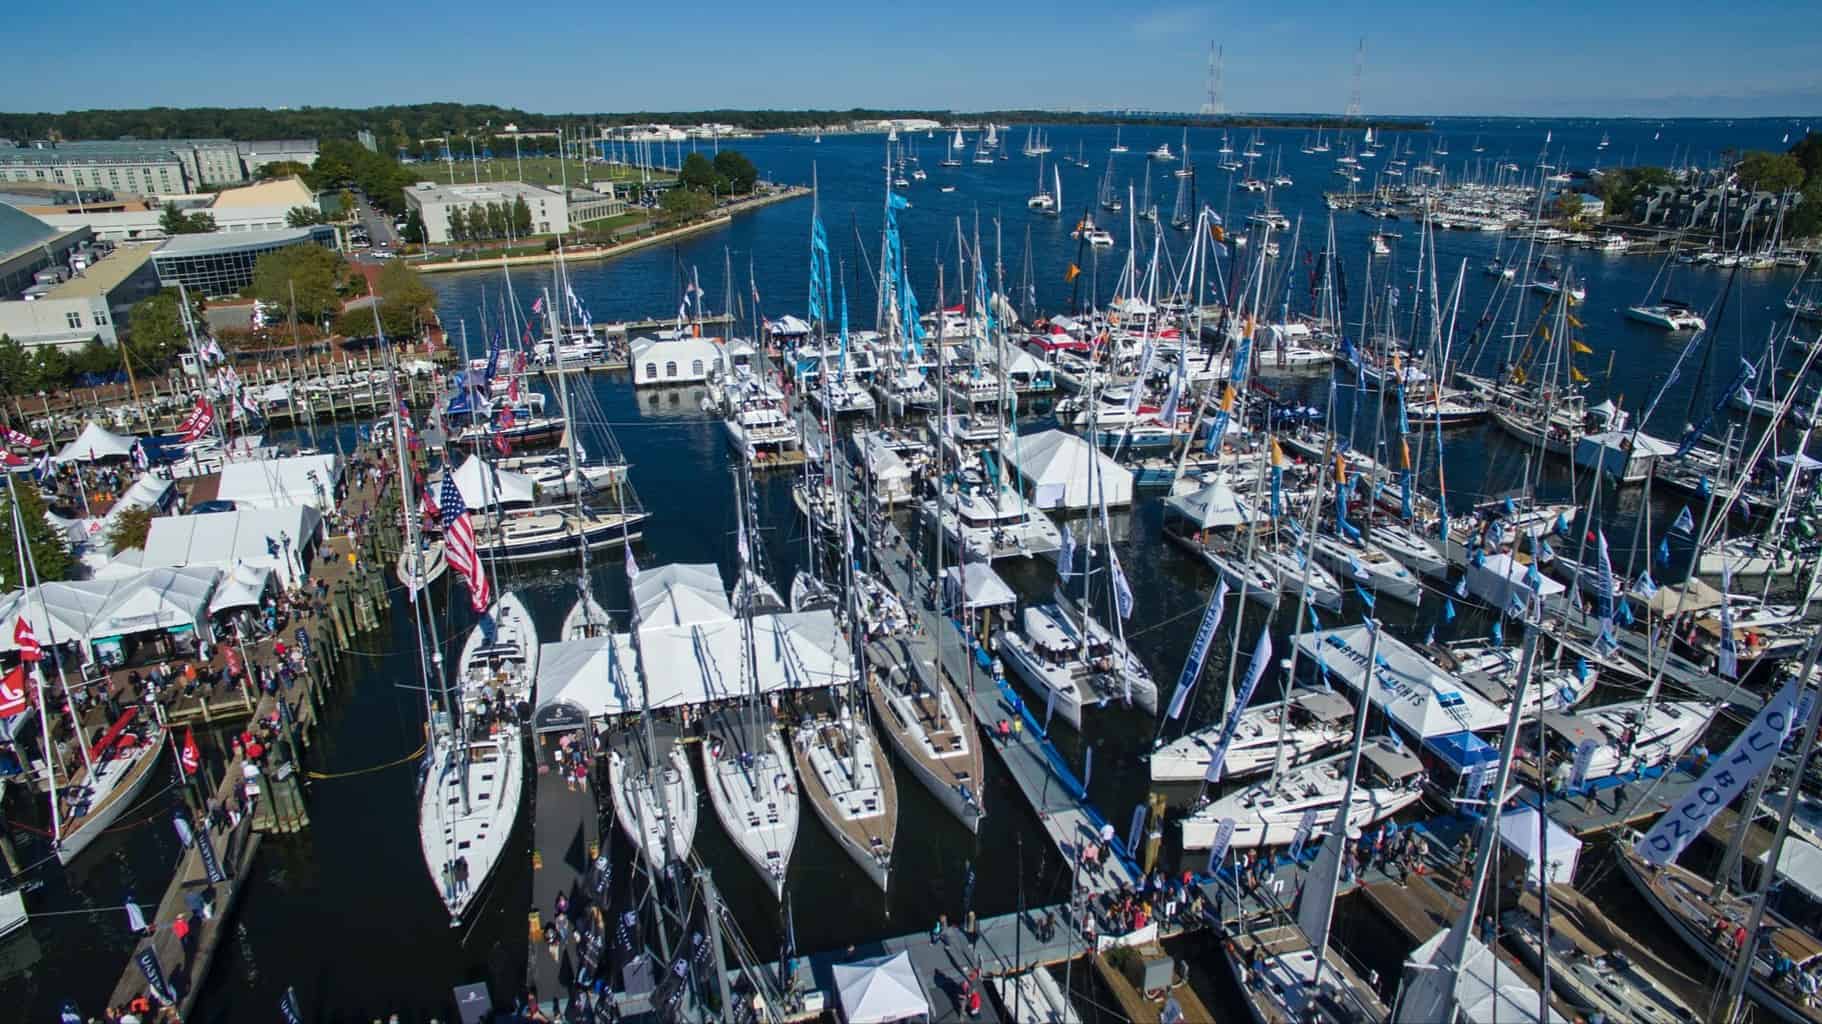 52 Years of Boat Show Memories on Display in Annapolis Chesapeake Bay